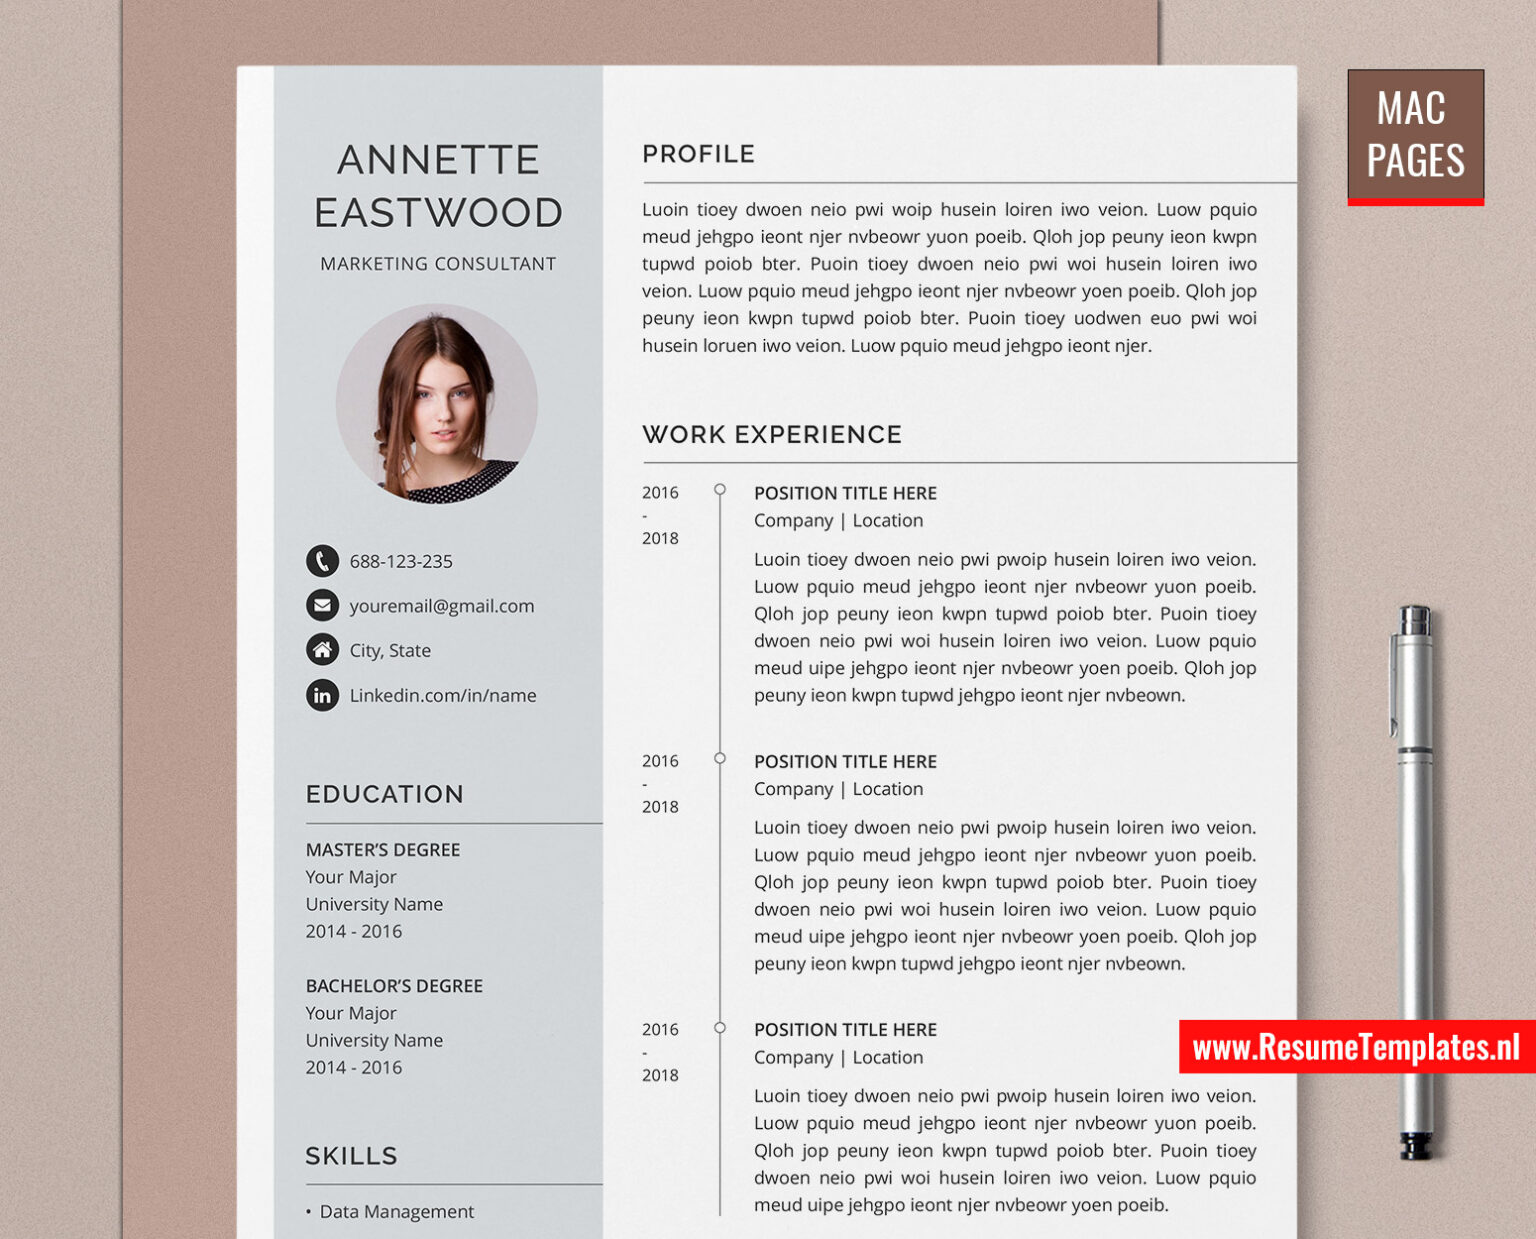 For Mac Pages Professional Resume Template CV Template For Mac Pages Cover Letter Modern